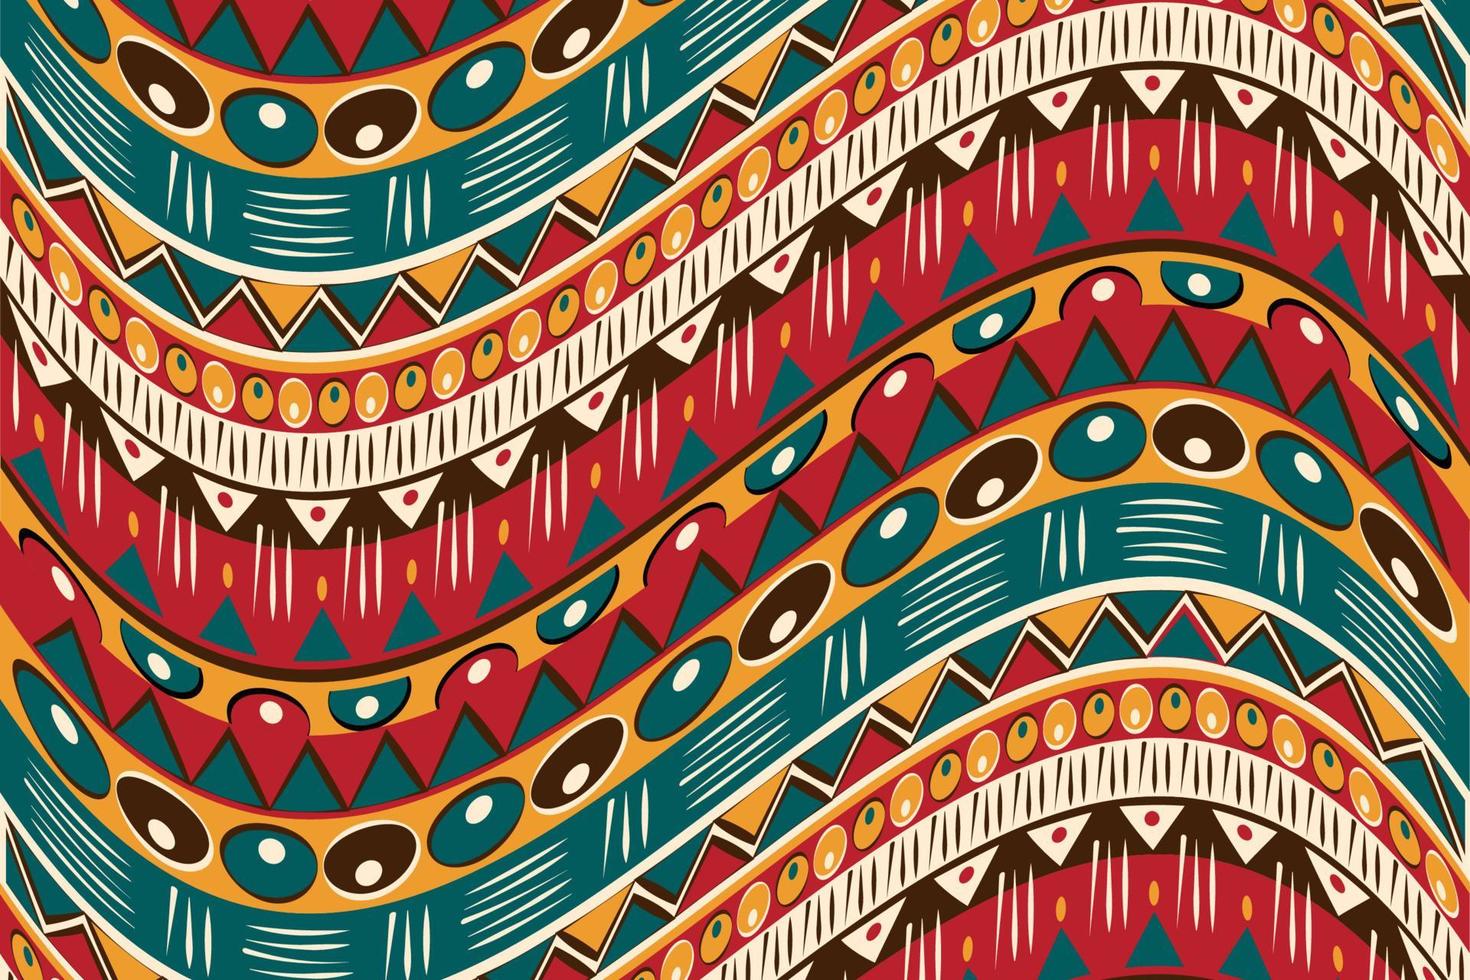 African print fabric, tribal ethnic ornament patchwork pattern. Handmade geometric elements ornament for your design, colorful Afro textile fashion style. Pareo wrap dress, carpet batik background vector